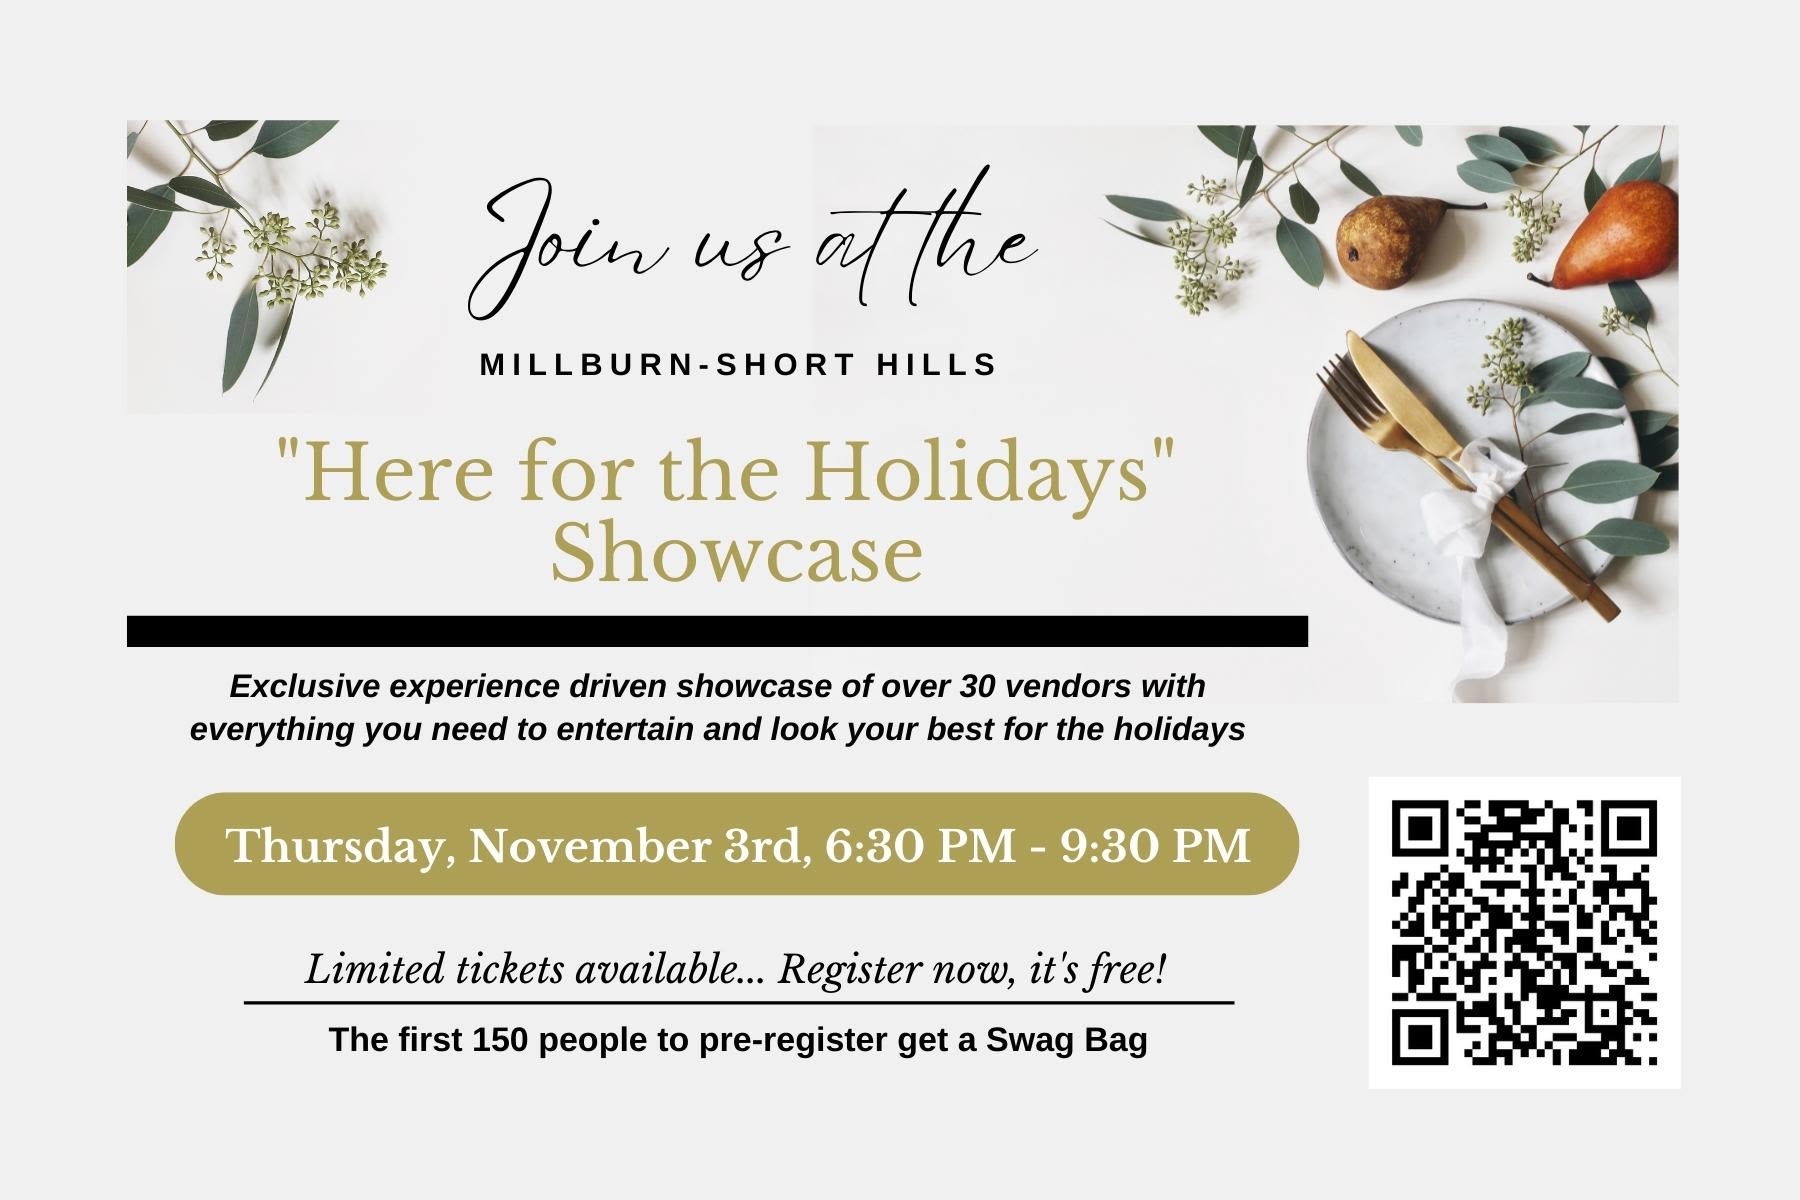 Holiday Showcase event in New Jersey